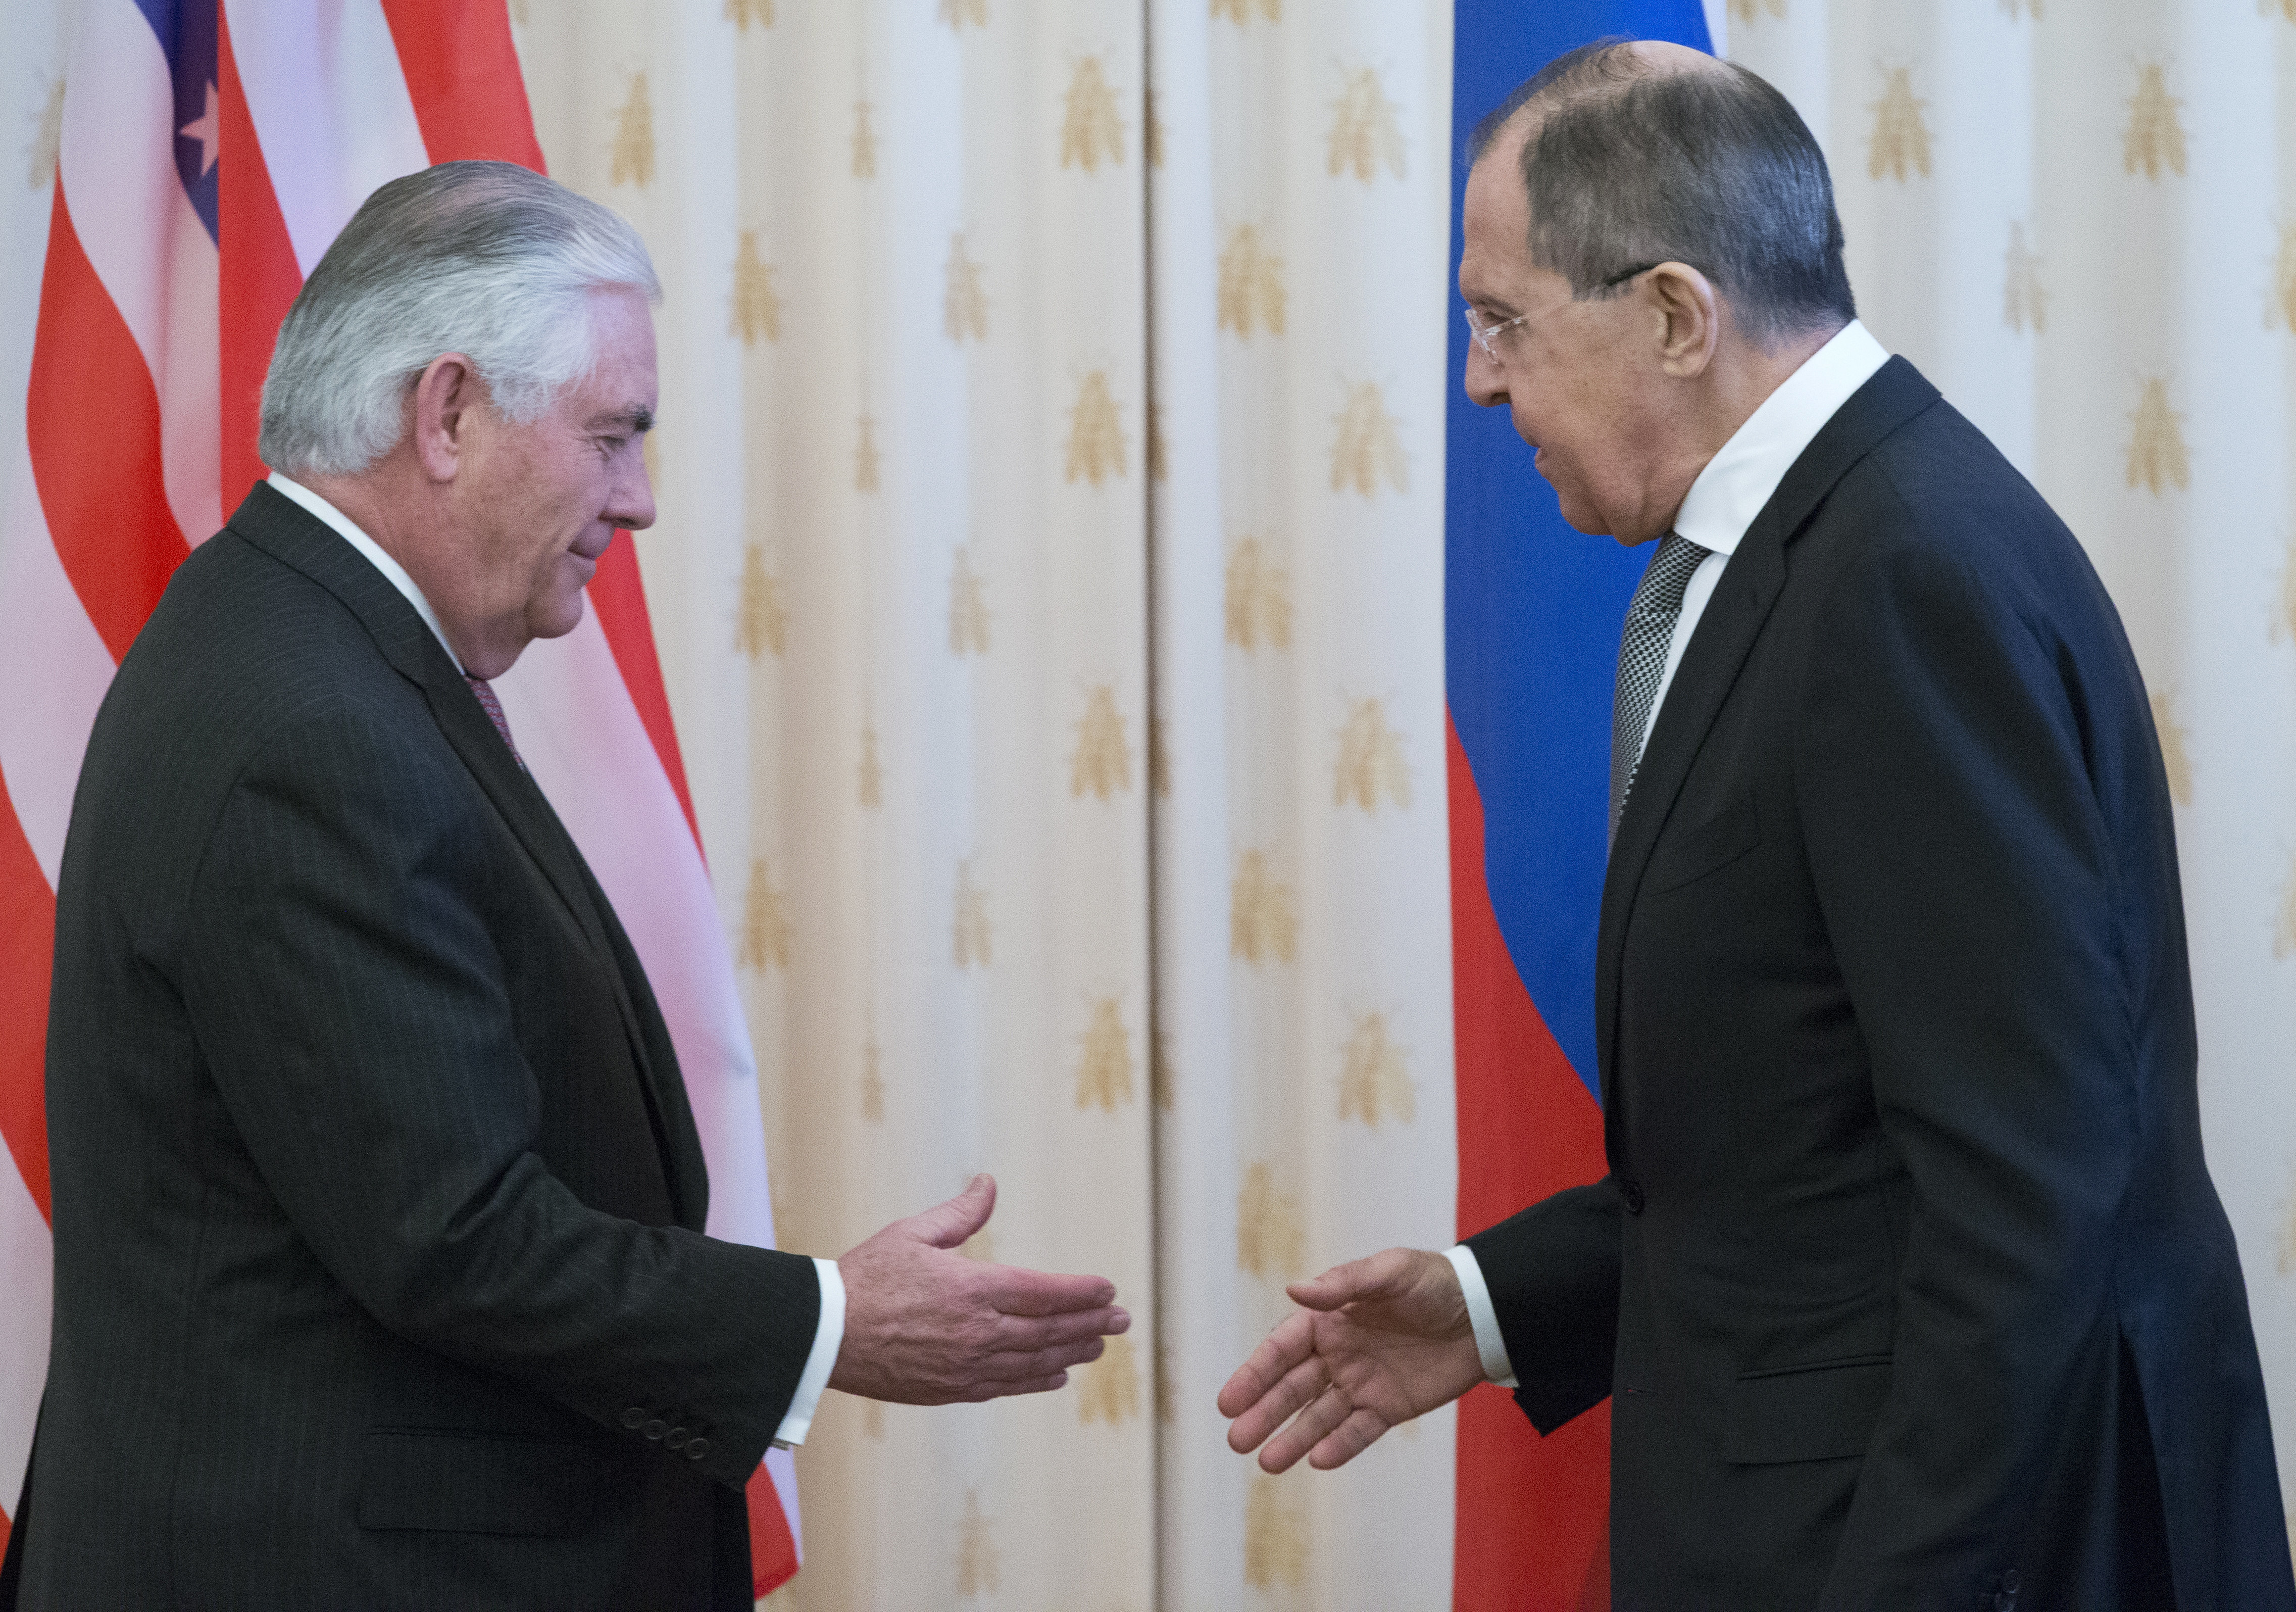 Secretary of State Rex Tillerson, left, and Russian Foreign Minister Sergey Lavrov shake hands prior to their talks in Moscow,  April 12, 2017.